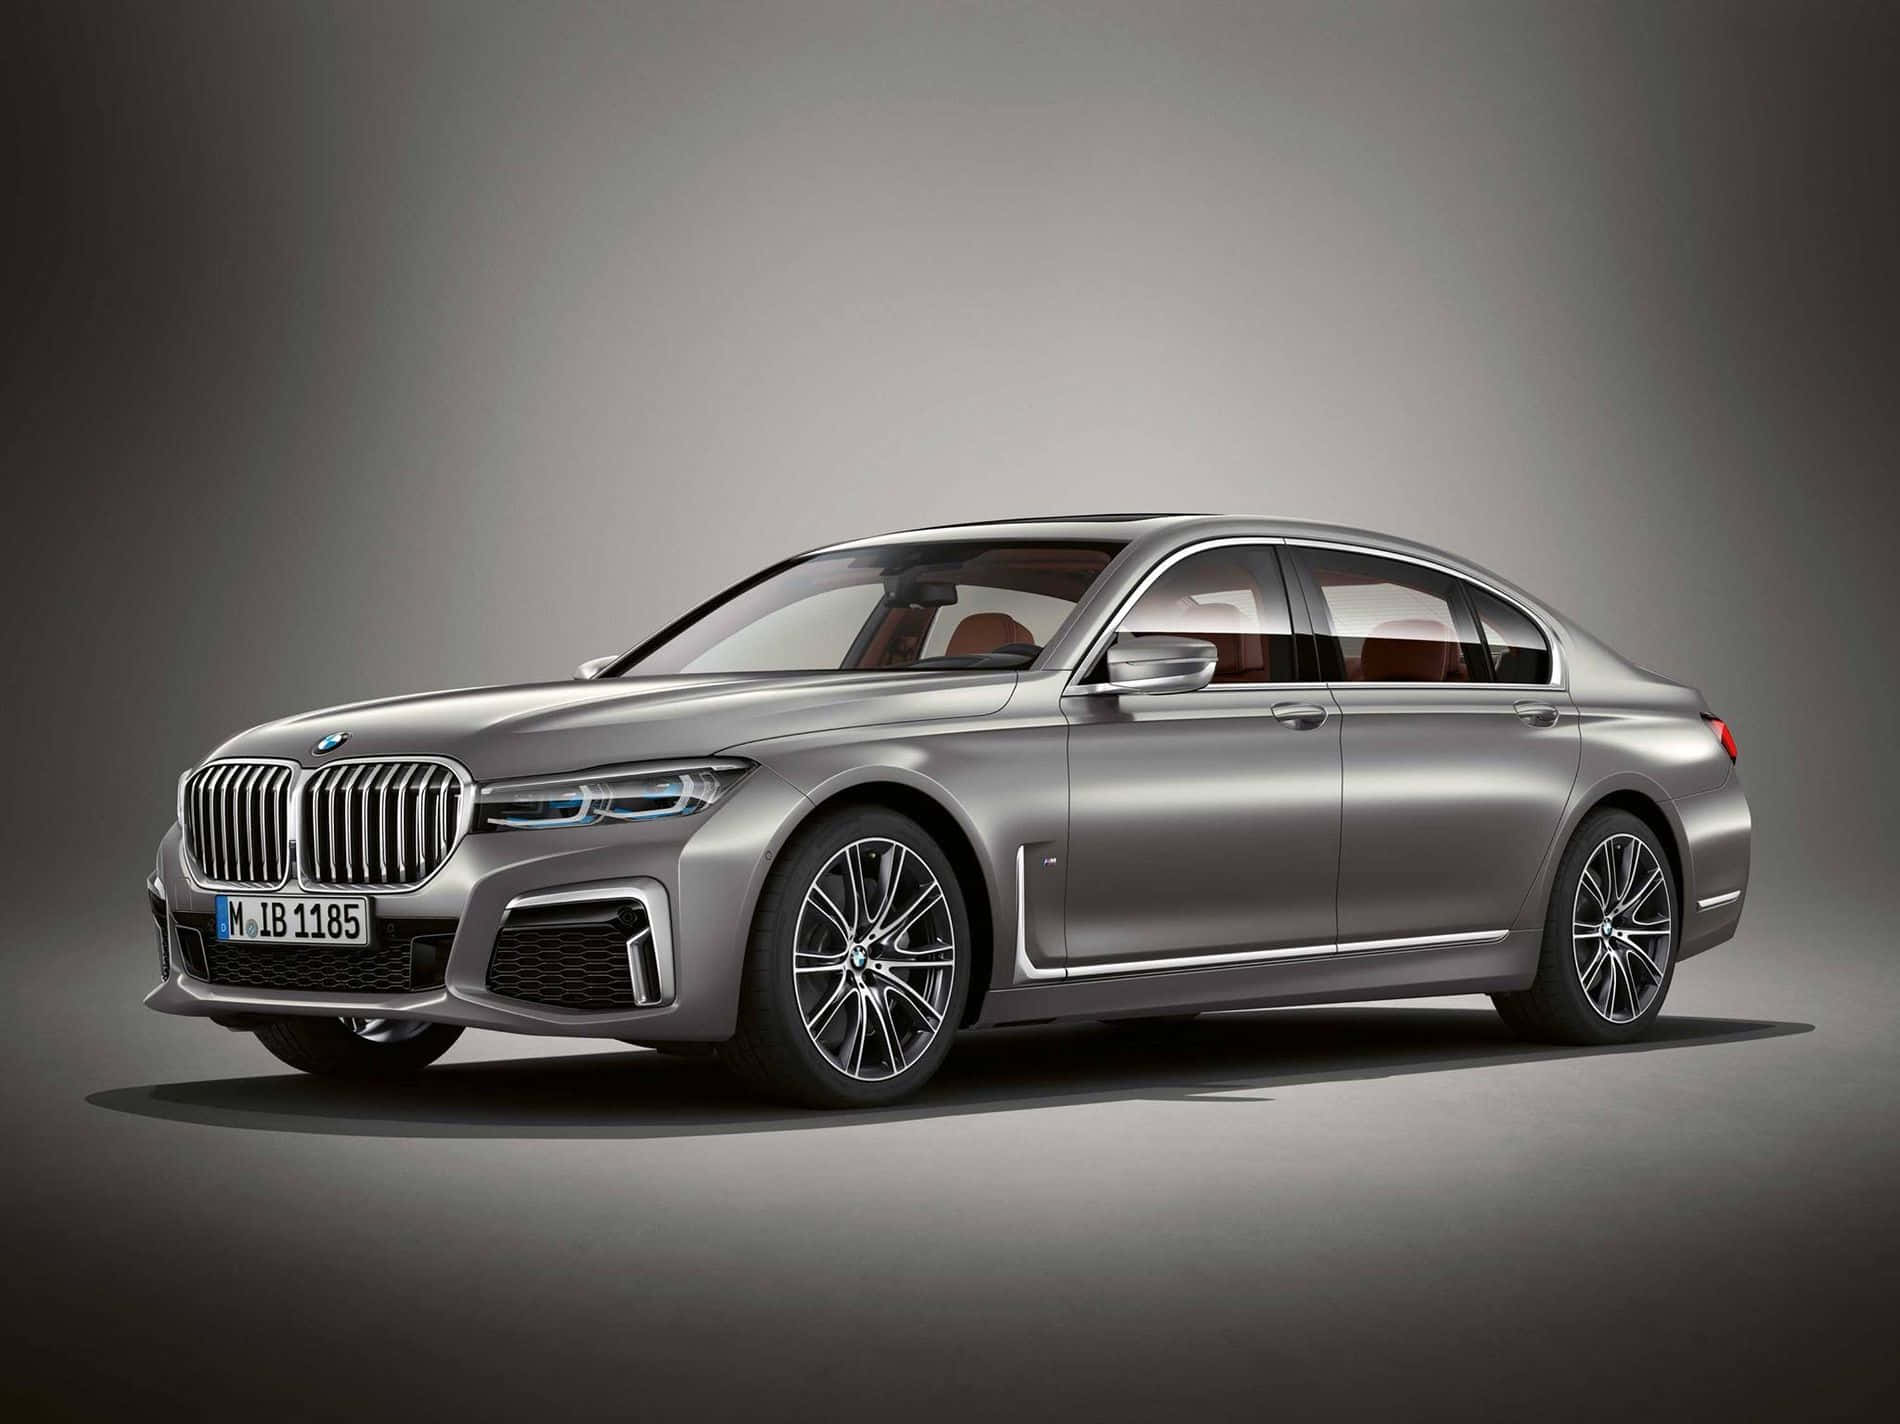 Sleek and Sophisticated: Introducing the BMW 7 Series Wallpaper